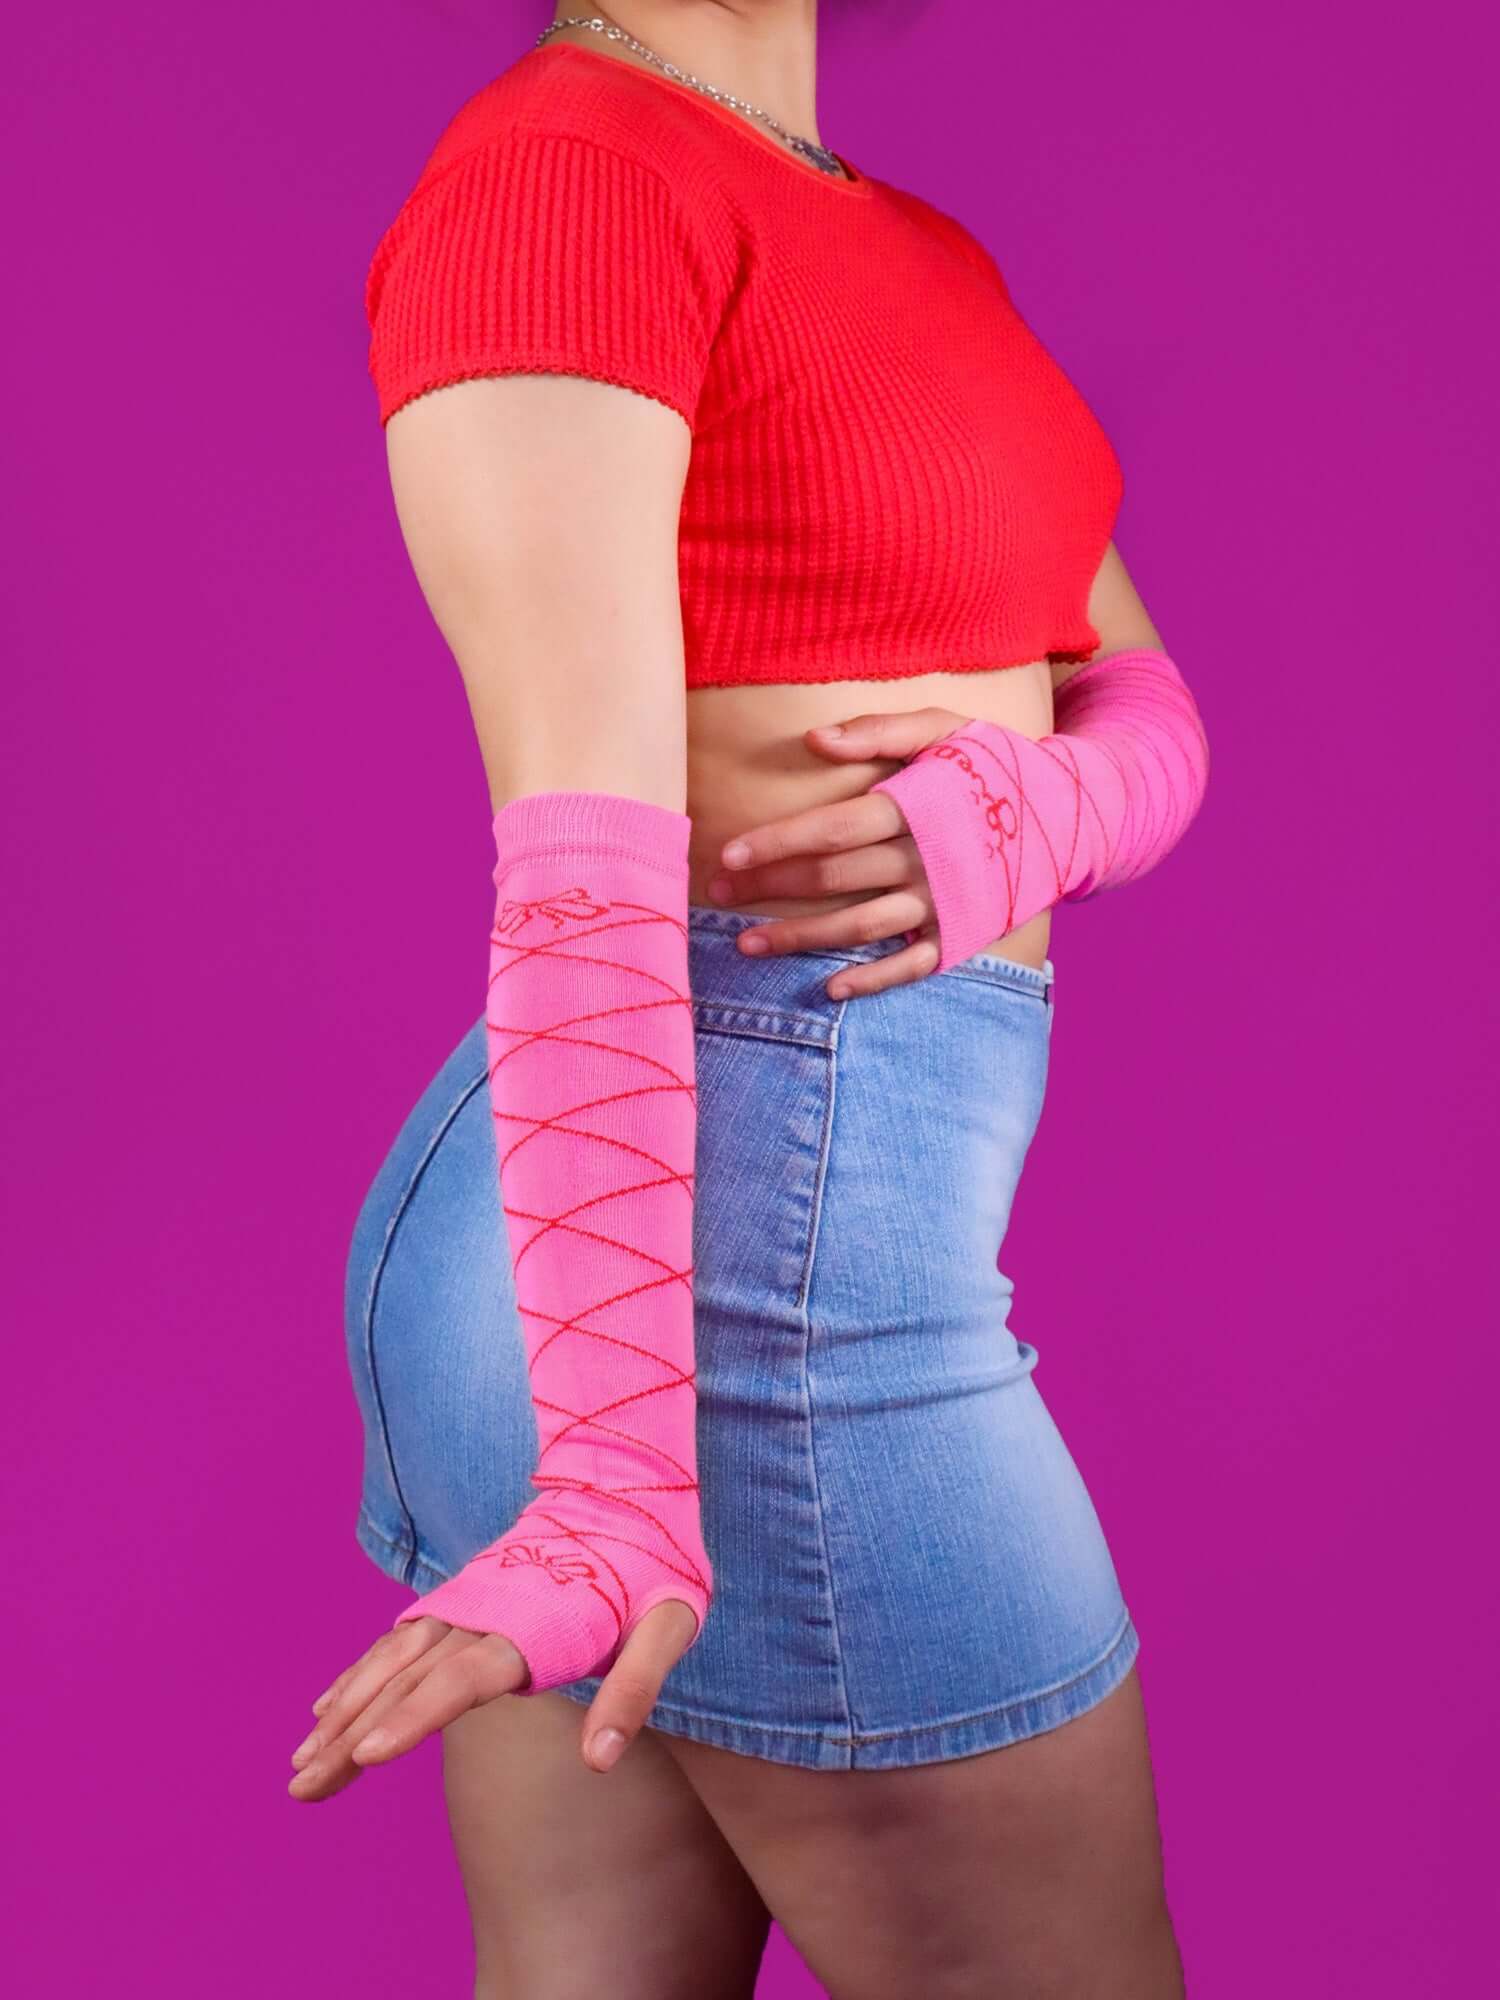 Another angle of Shocking Pink arm warmers